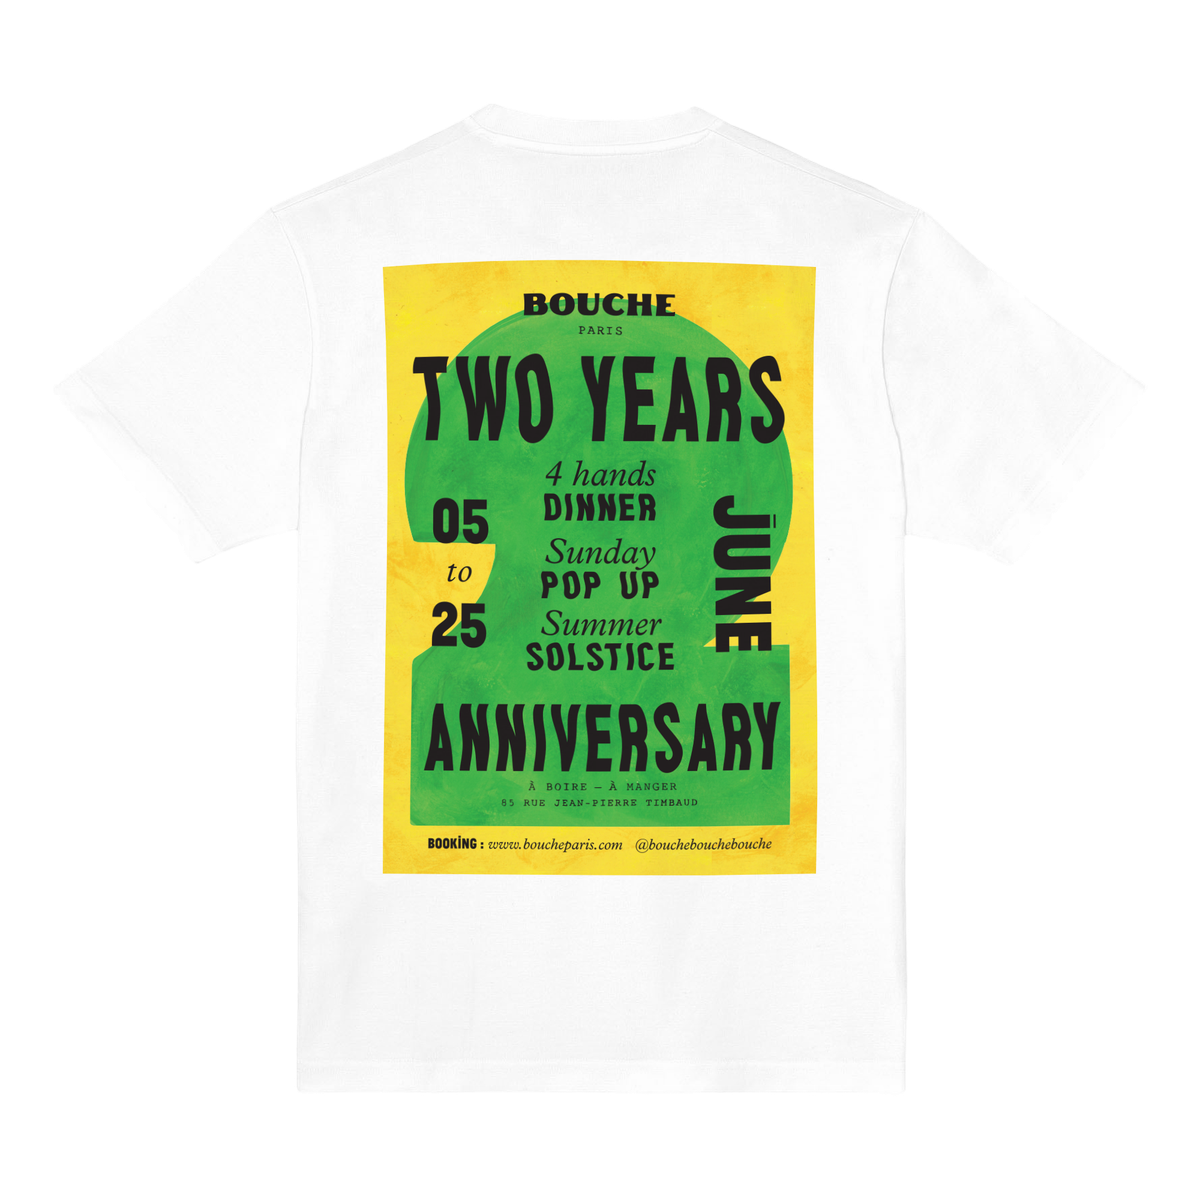 "Two Years" t-shirt